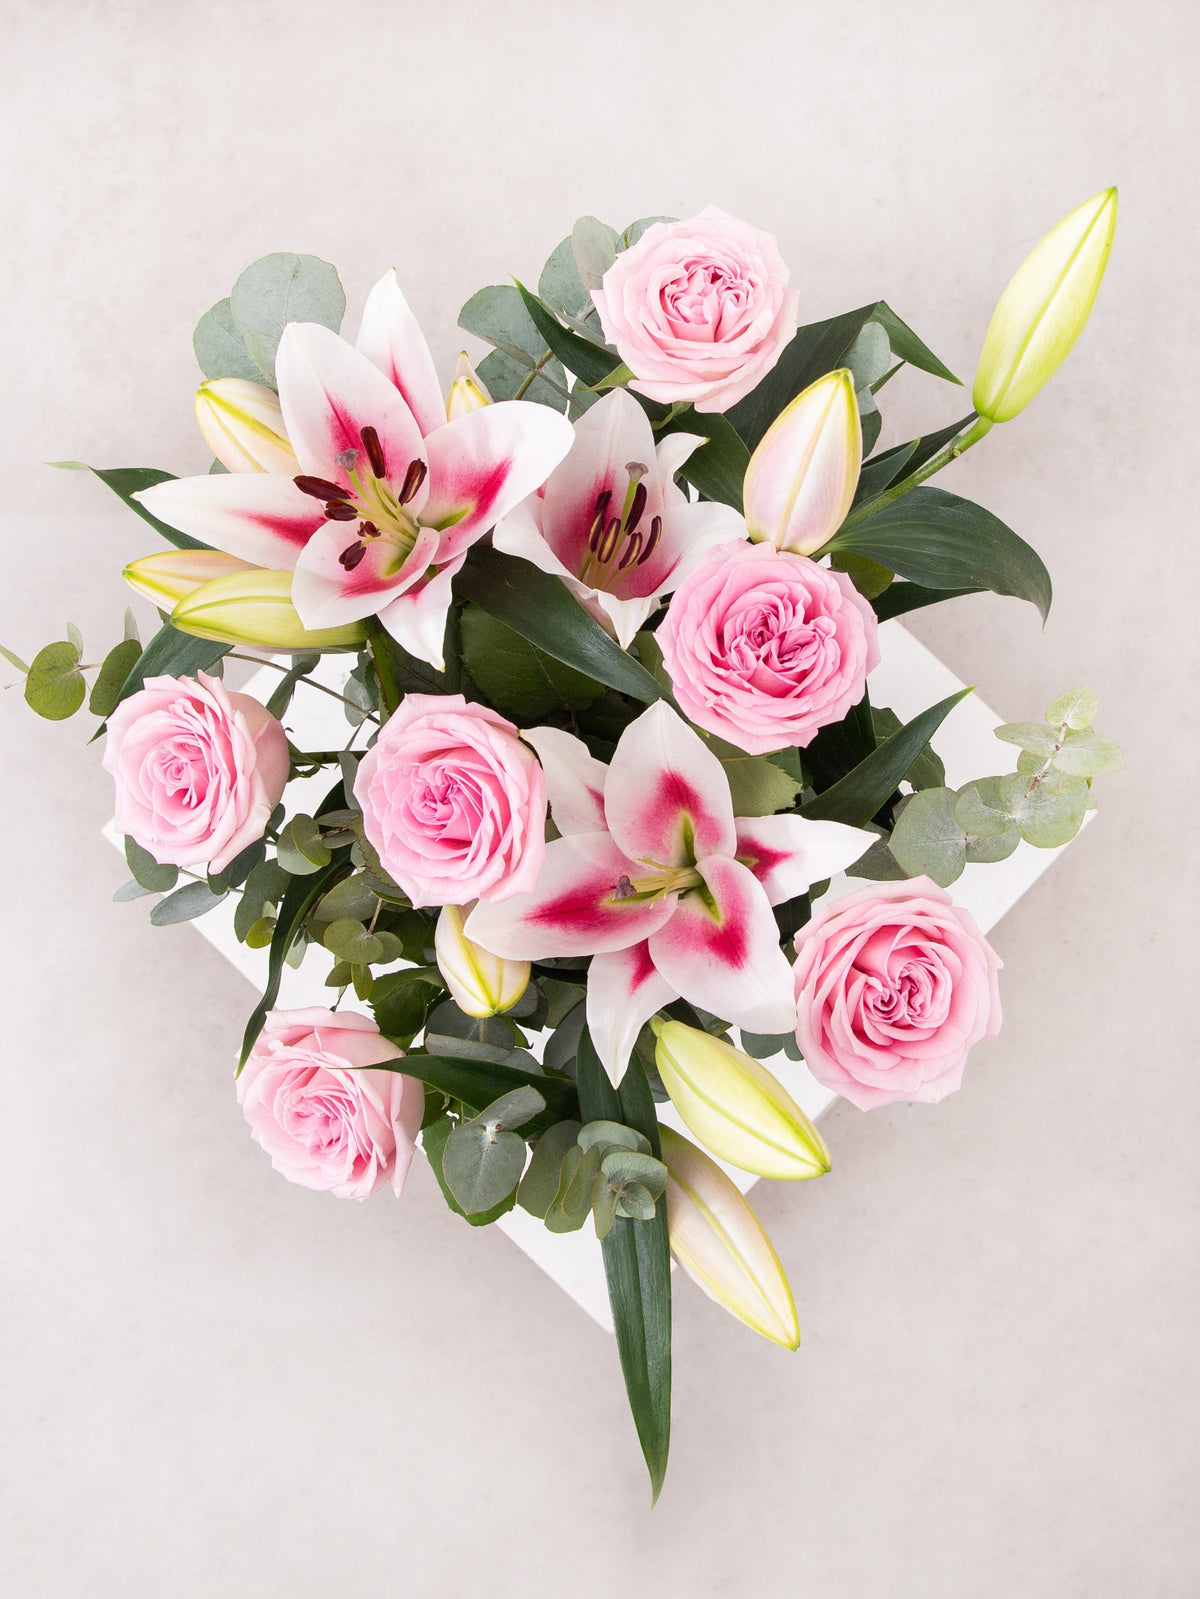 Pink Roses and Pink Lily in a vase